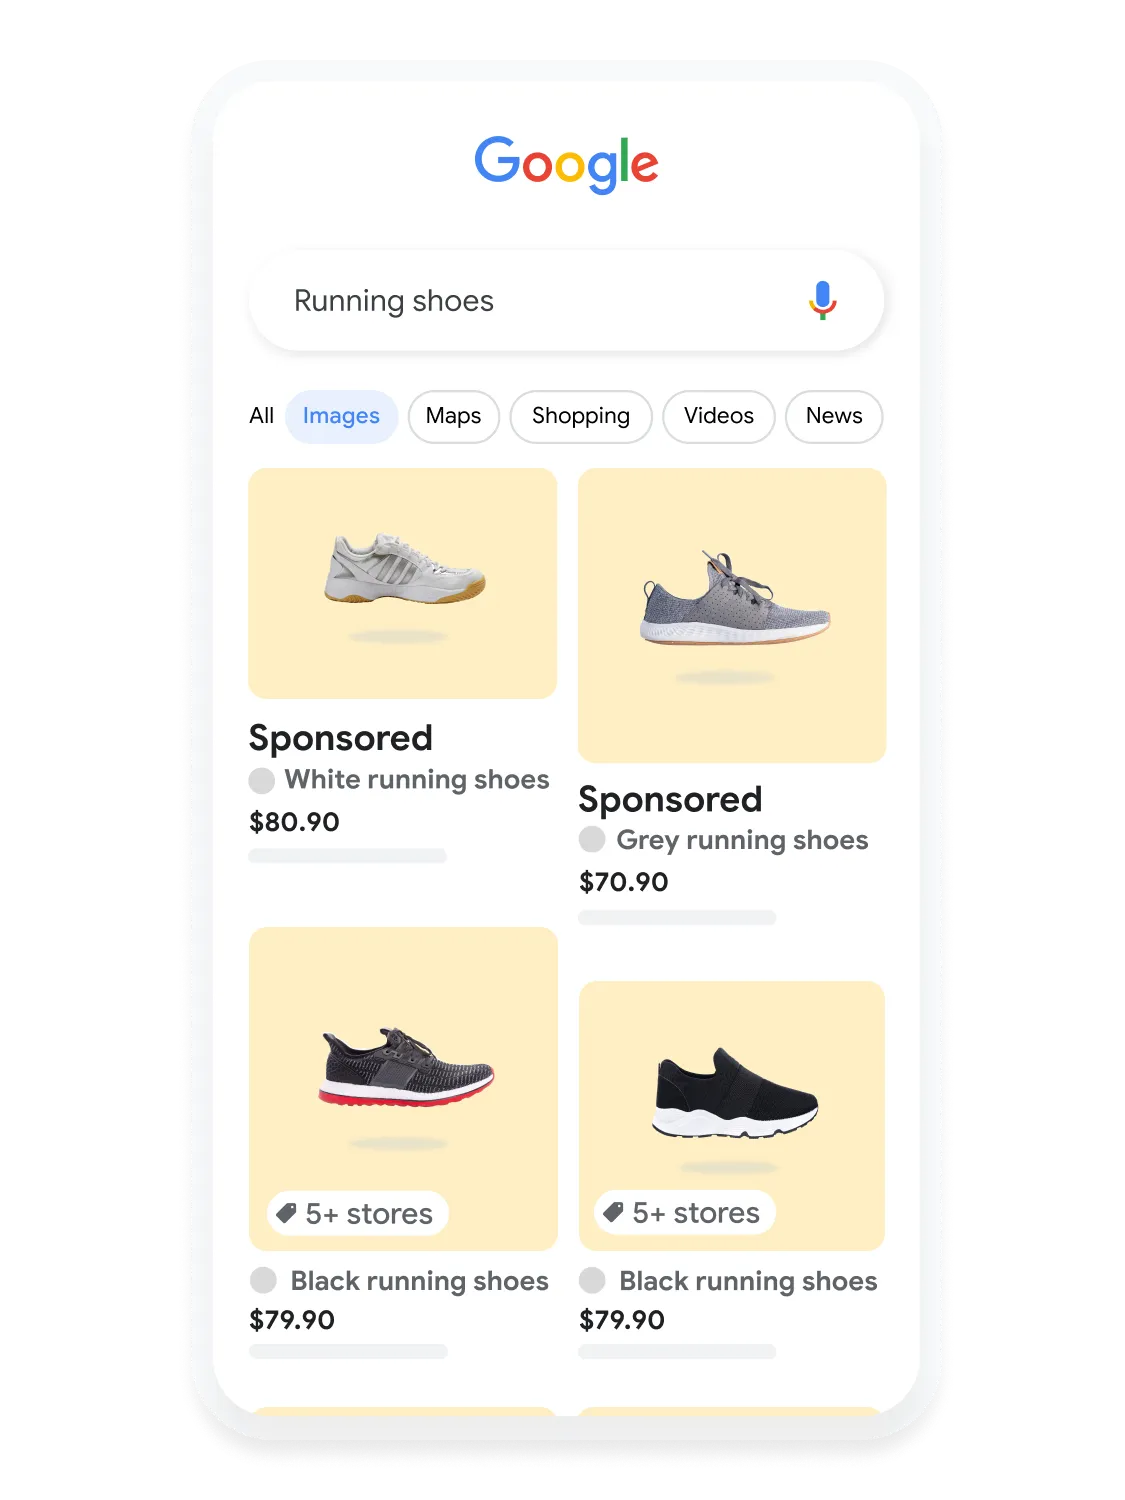 Mobile user interface animated to show a user searching for running shoes on Google Images.